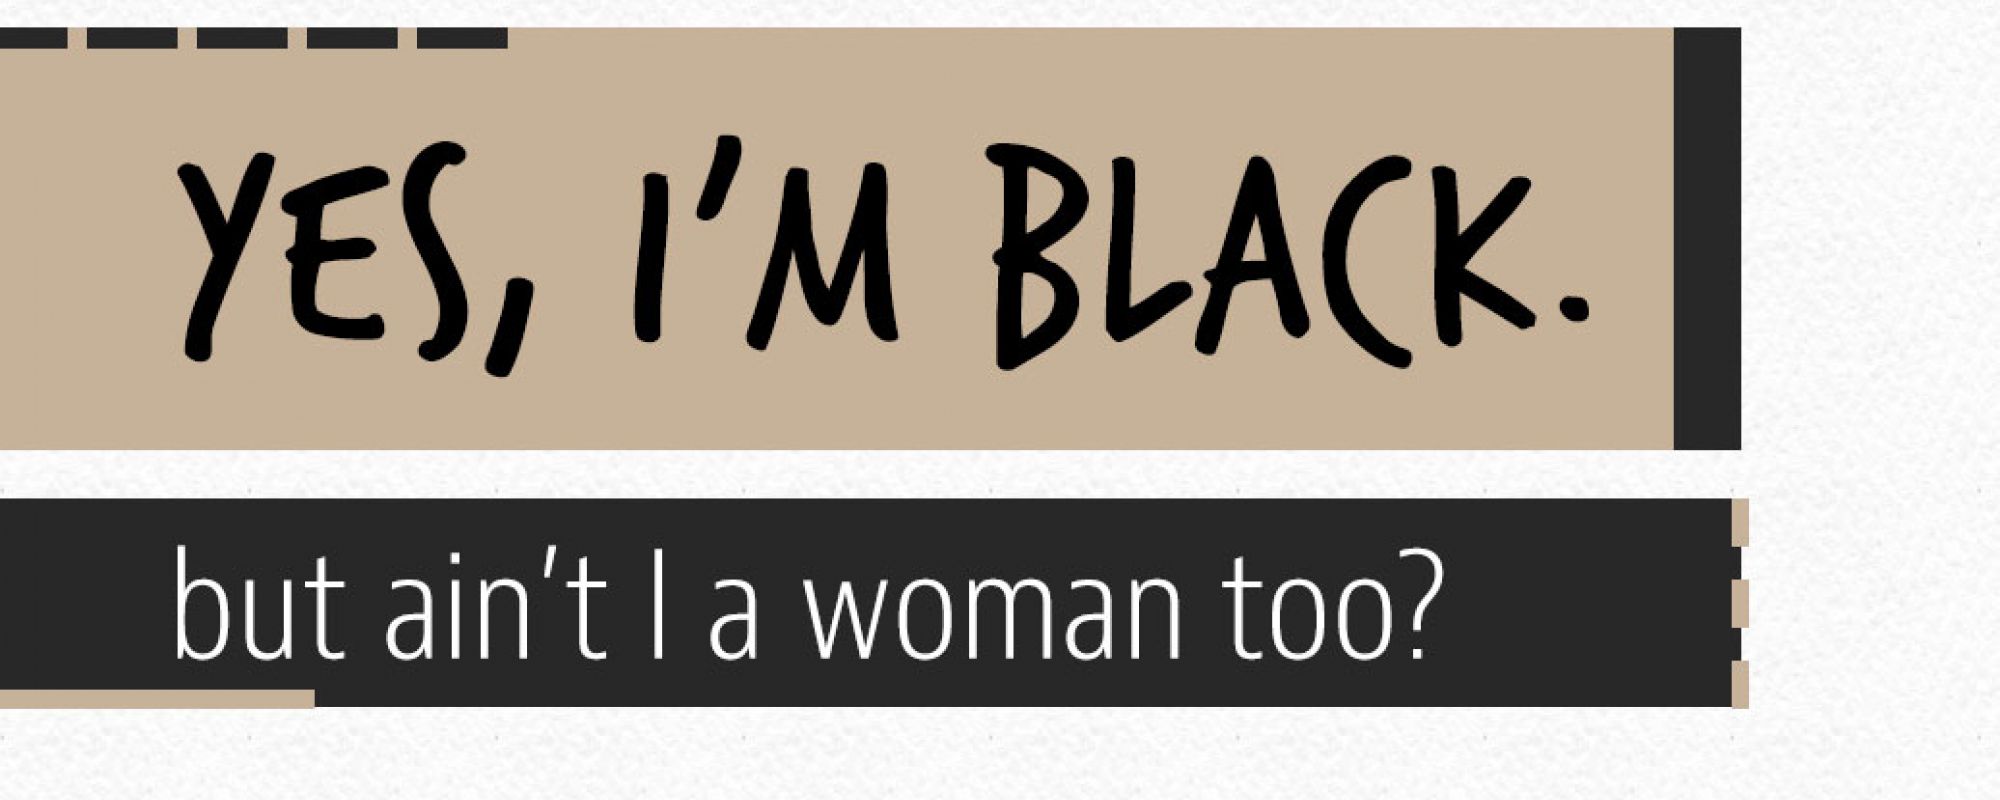 Yes, I'm black. But ain't I a woman too?